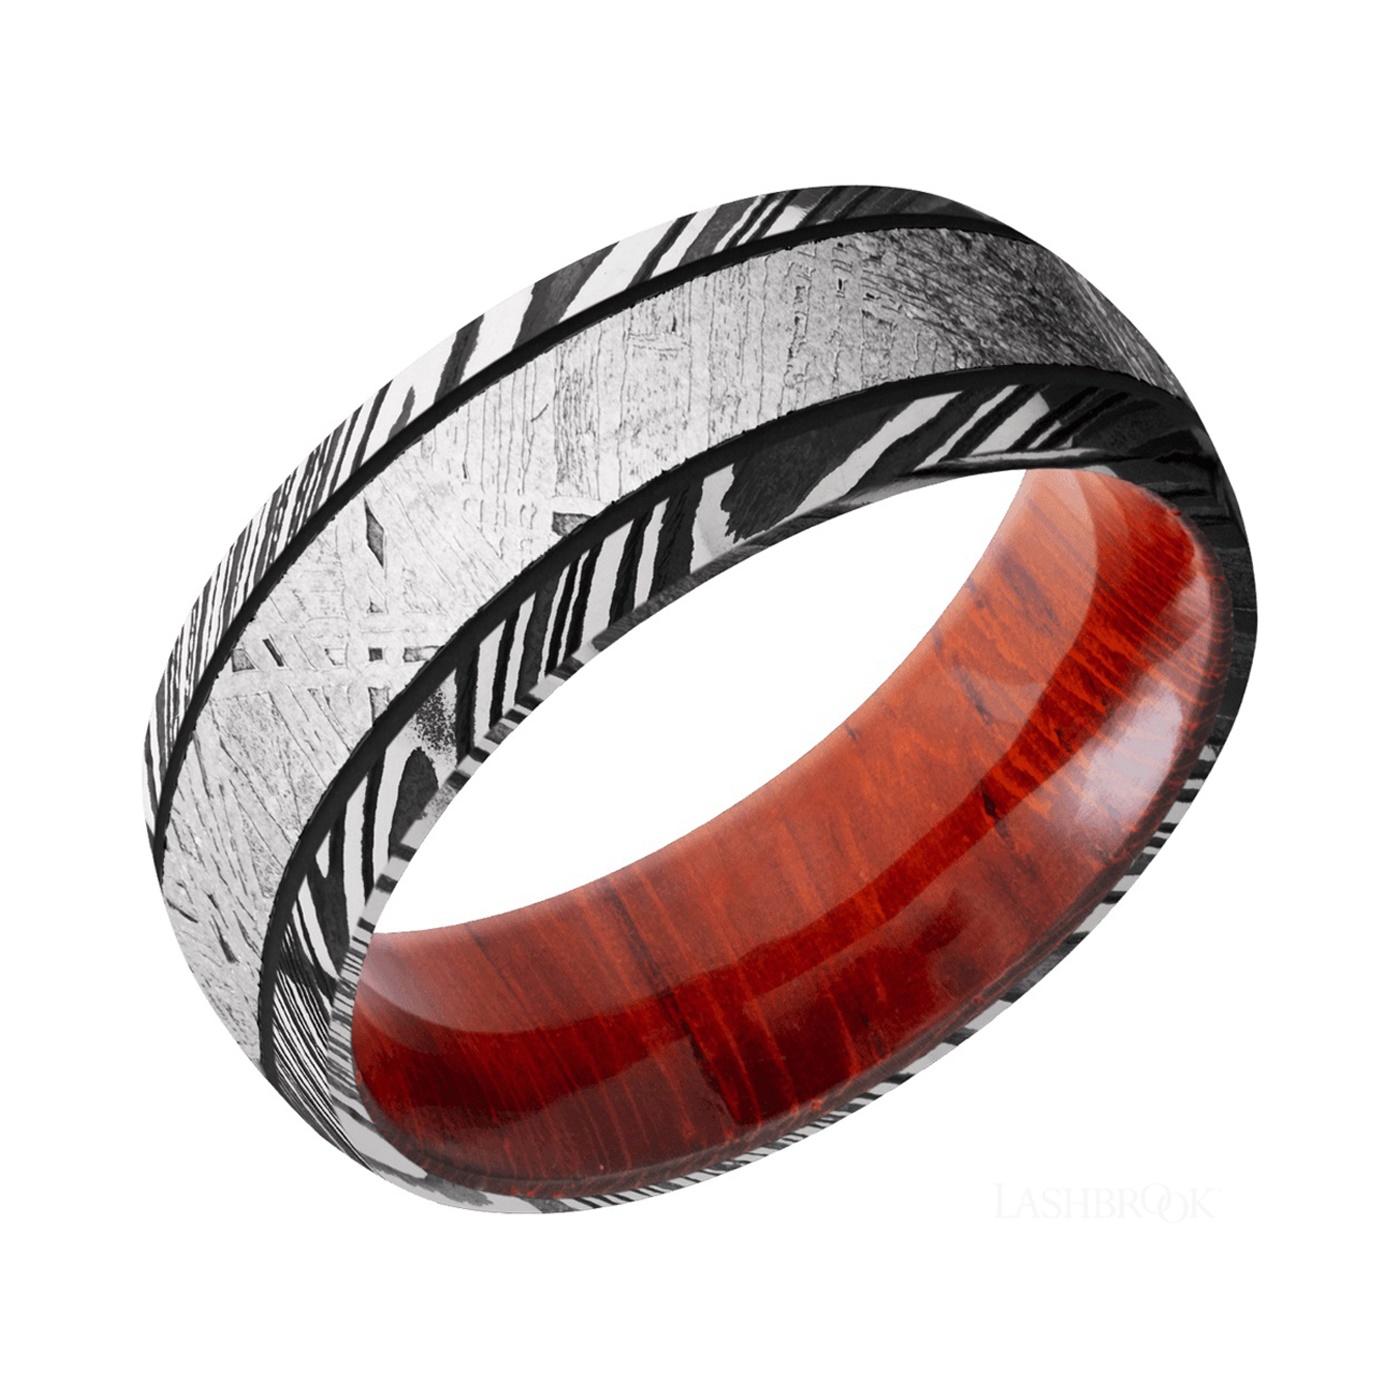 Cool Ring Damascus Steel Ring With Outer Wooden Inlay, Wood Ring